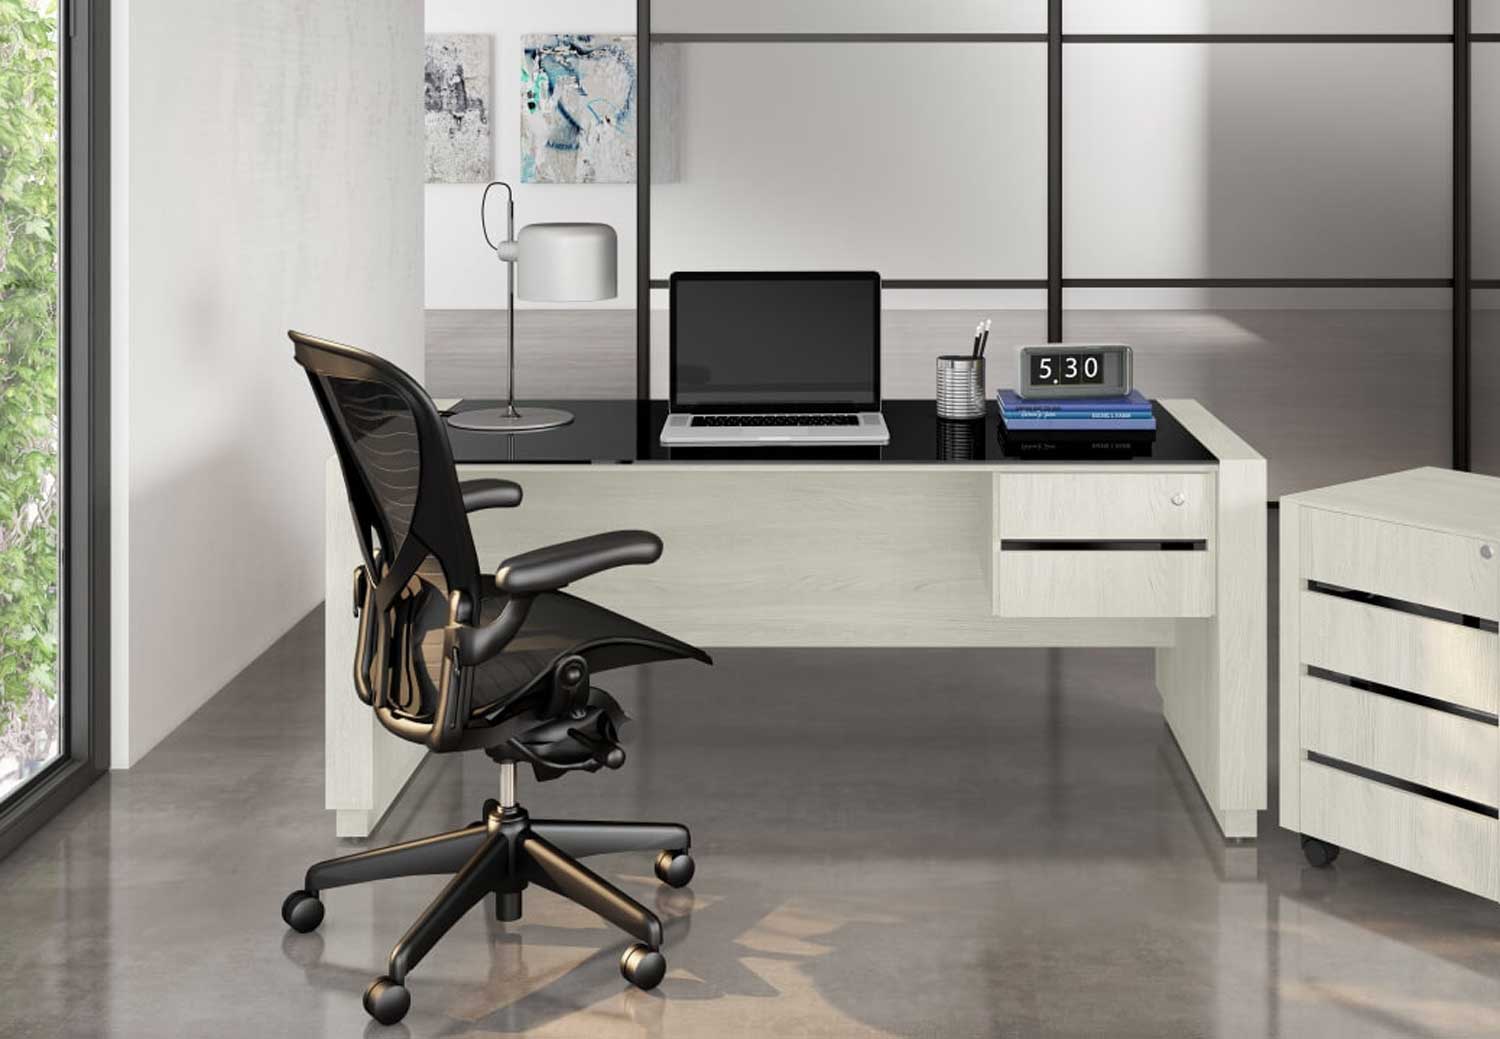 Know About the Best Ergonomic Office Chairs Singapore